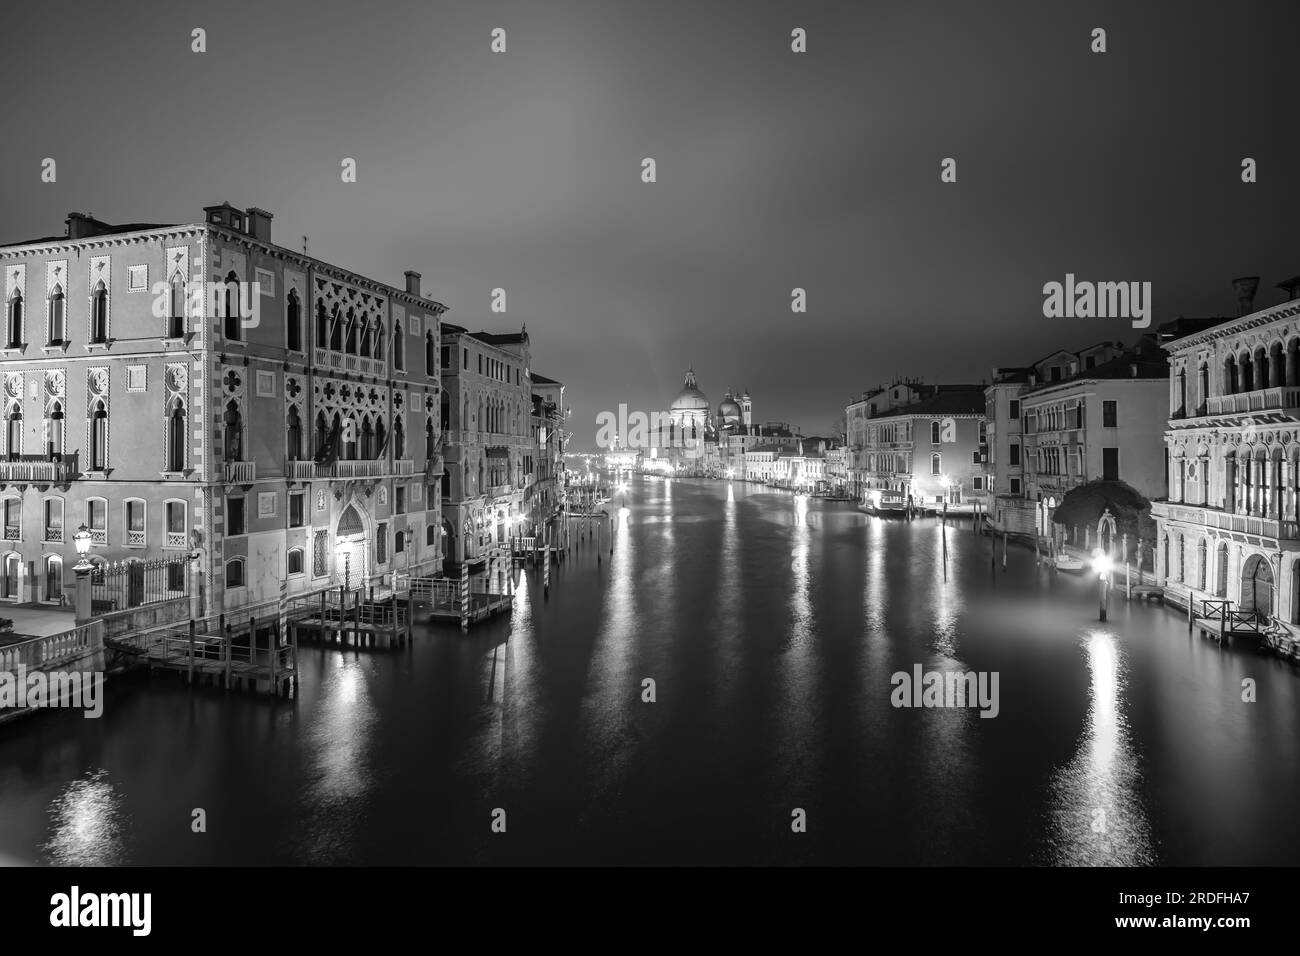 Venice,  Italy - April 27, 2019 : Panoramic view of the beautiful  illuminated grand Canal in Venice Italy in black and white Stock Photo